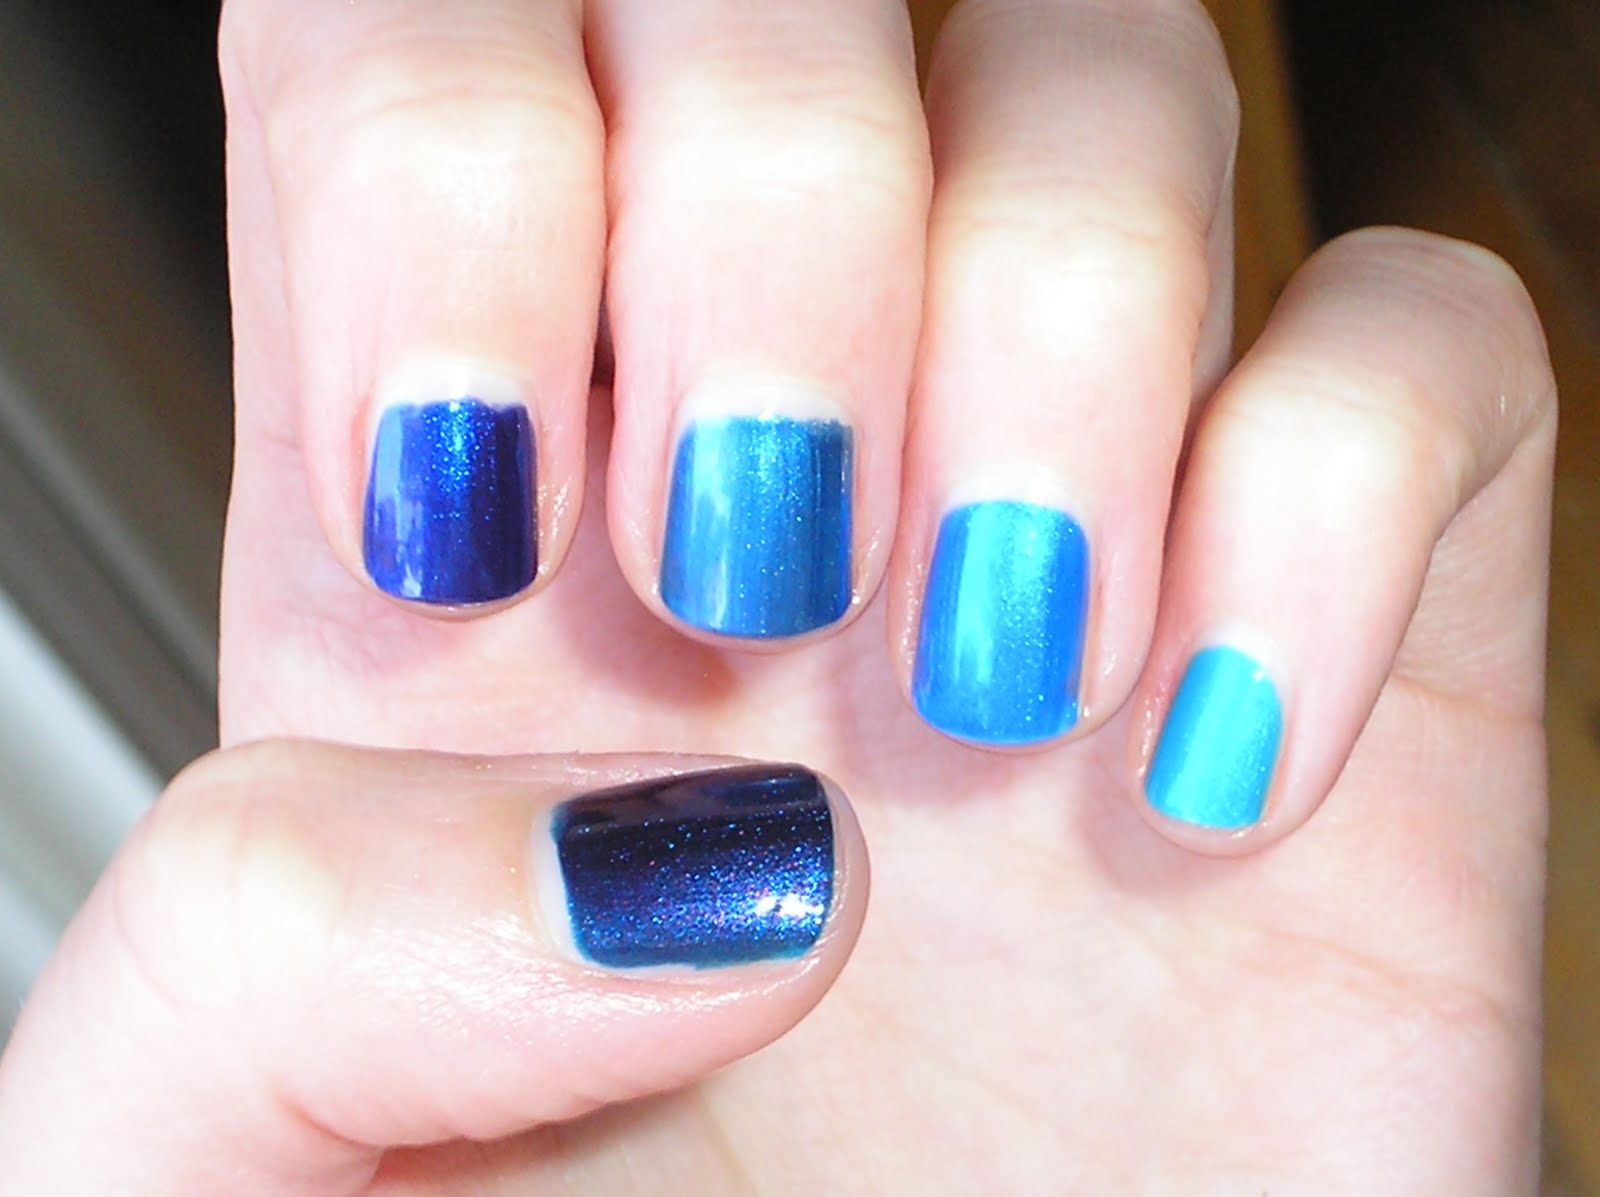 3. Ombre Nail Polish - wide 7